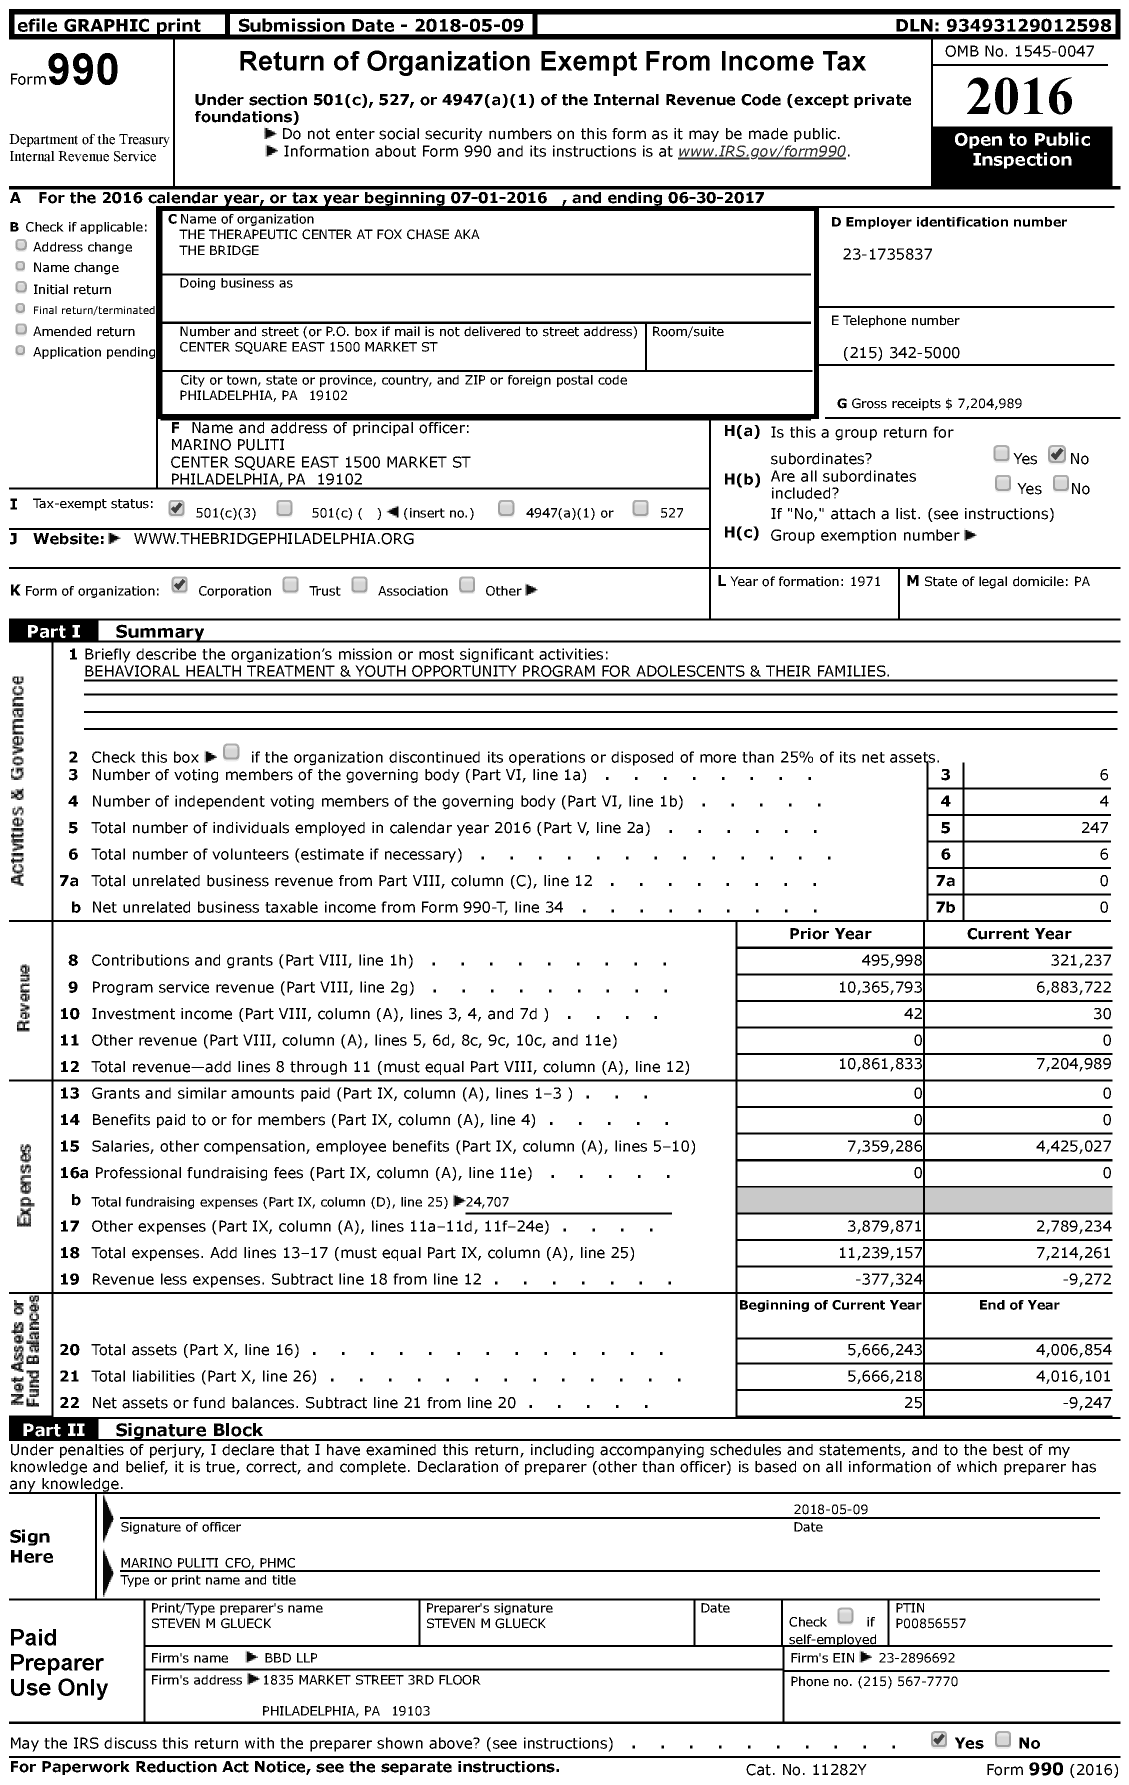 Image of first page of 2016 Form 990 for The Bridge Phildelphia